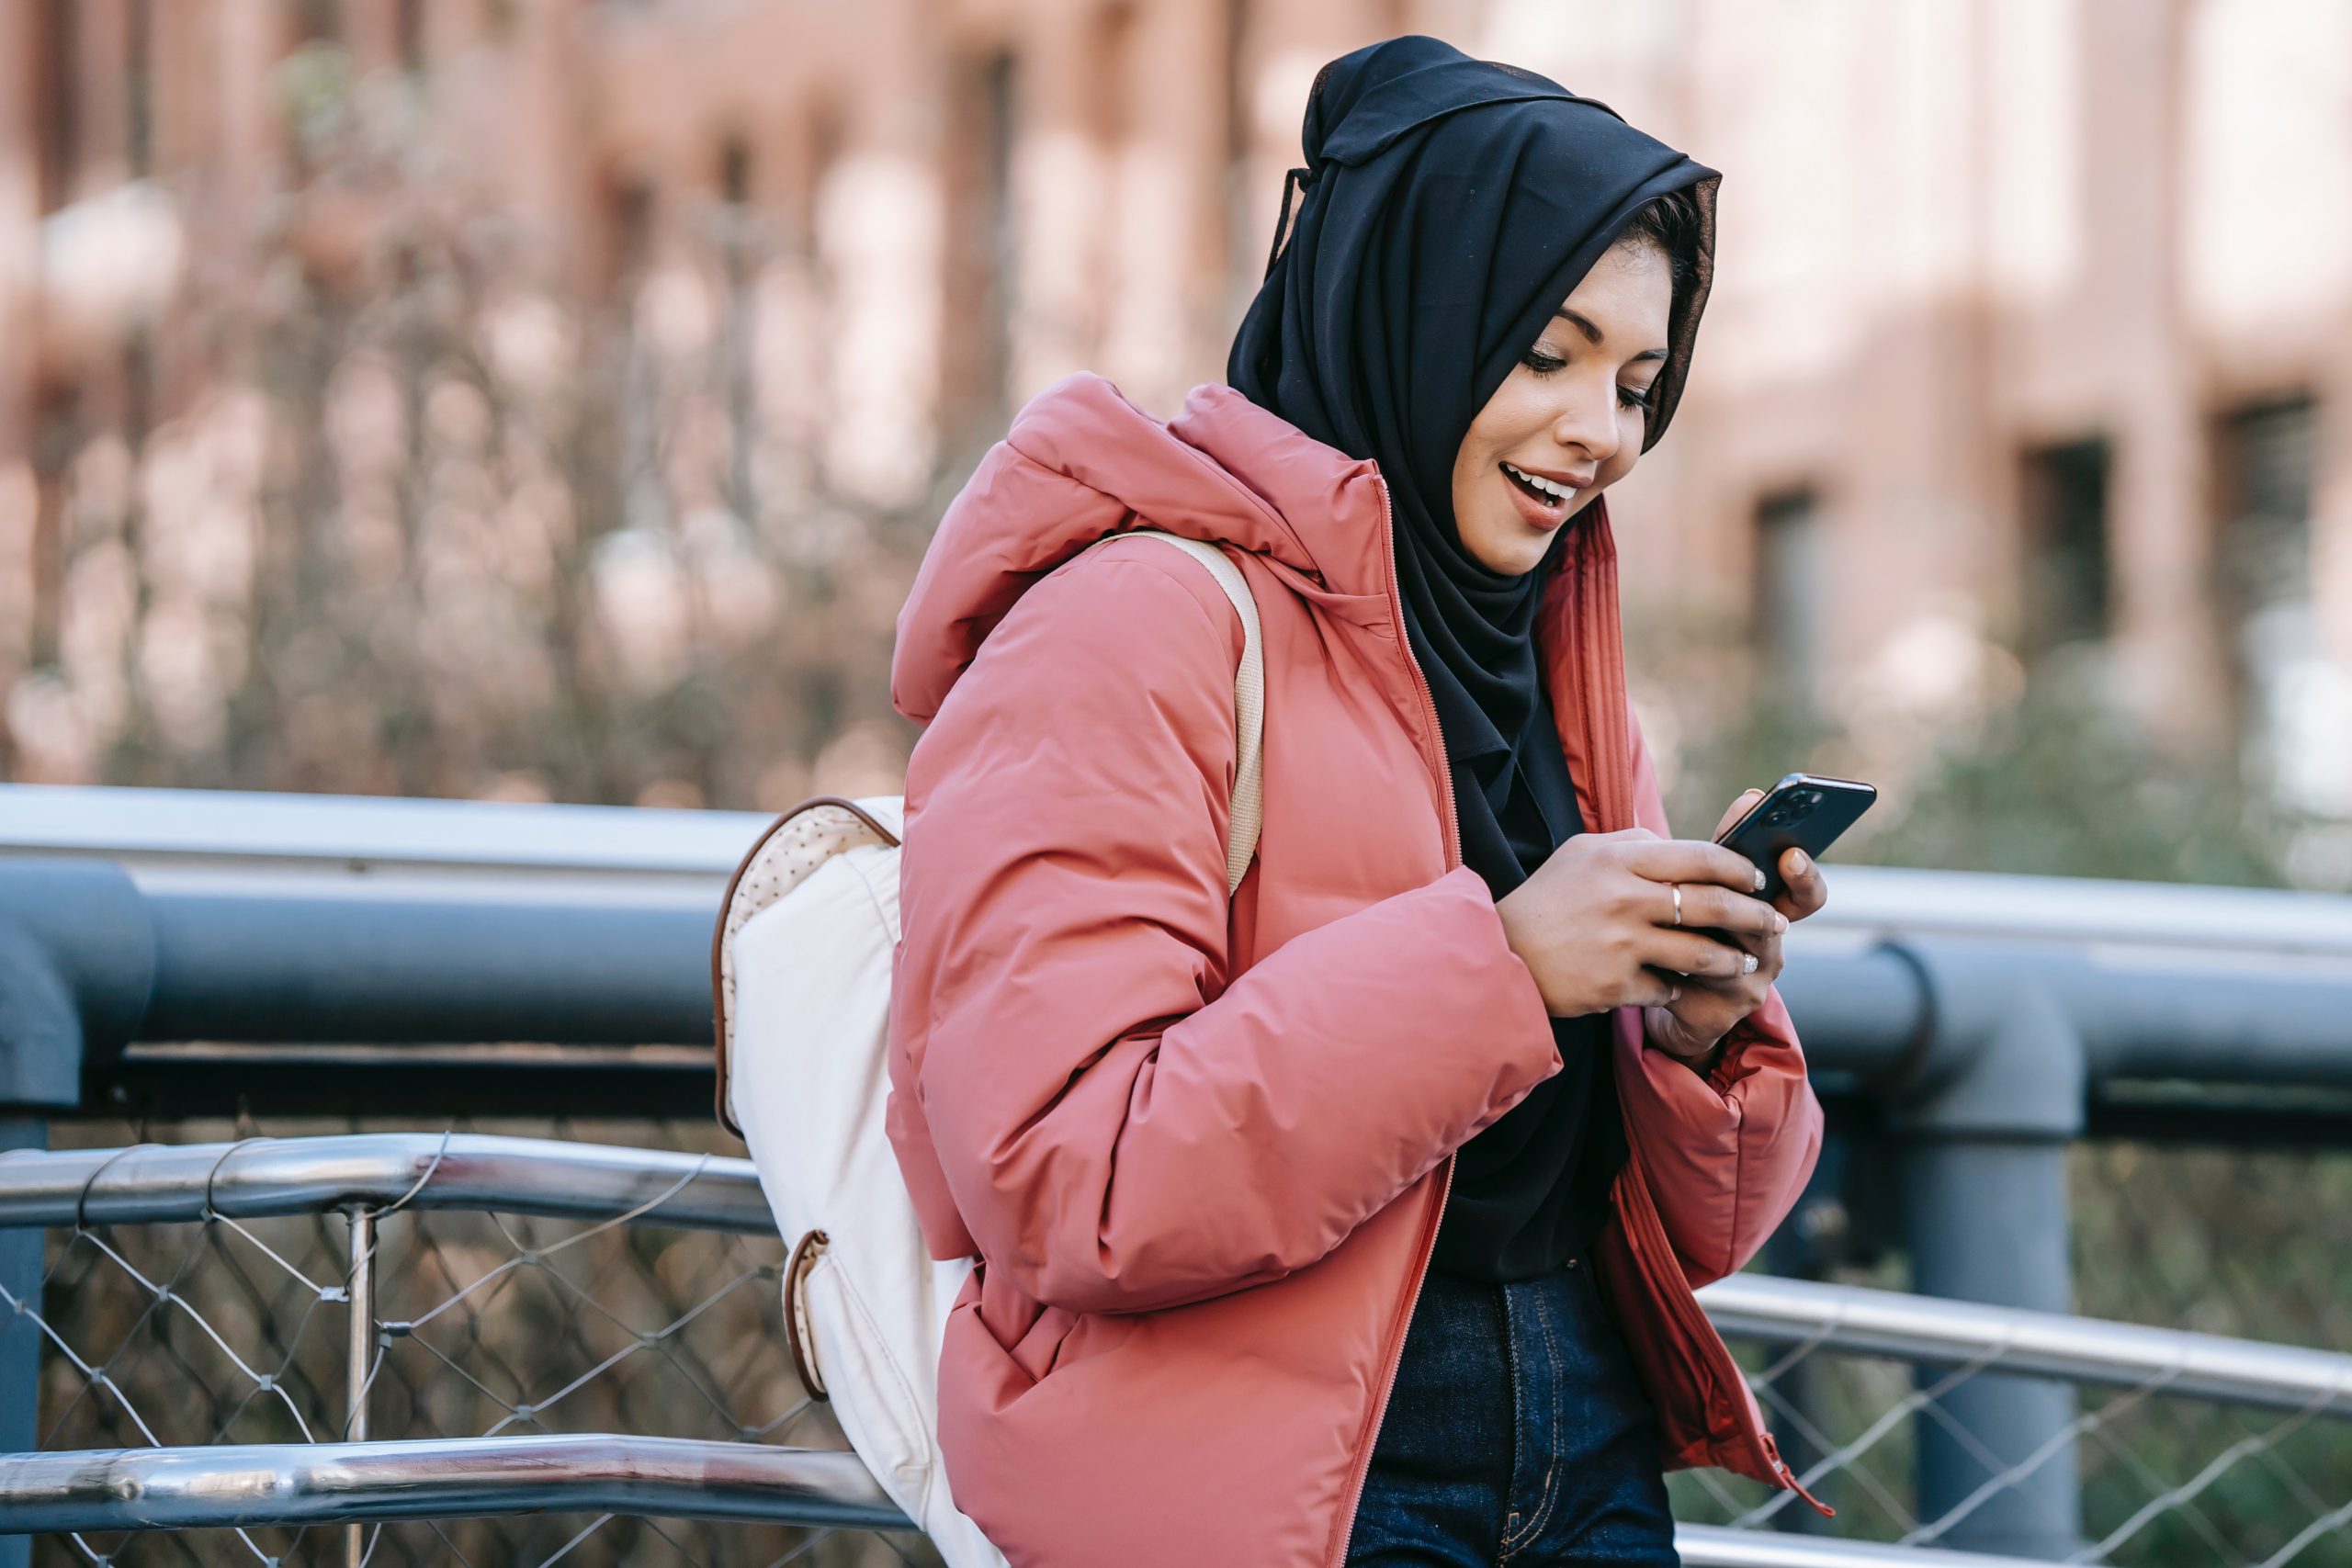 A young woman is outside, she wears a warm puffa jacket and is smiling looking down at her phone.